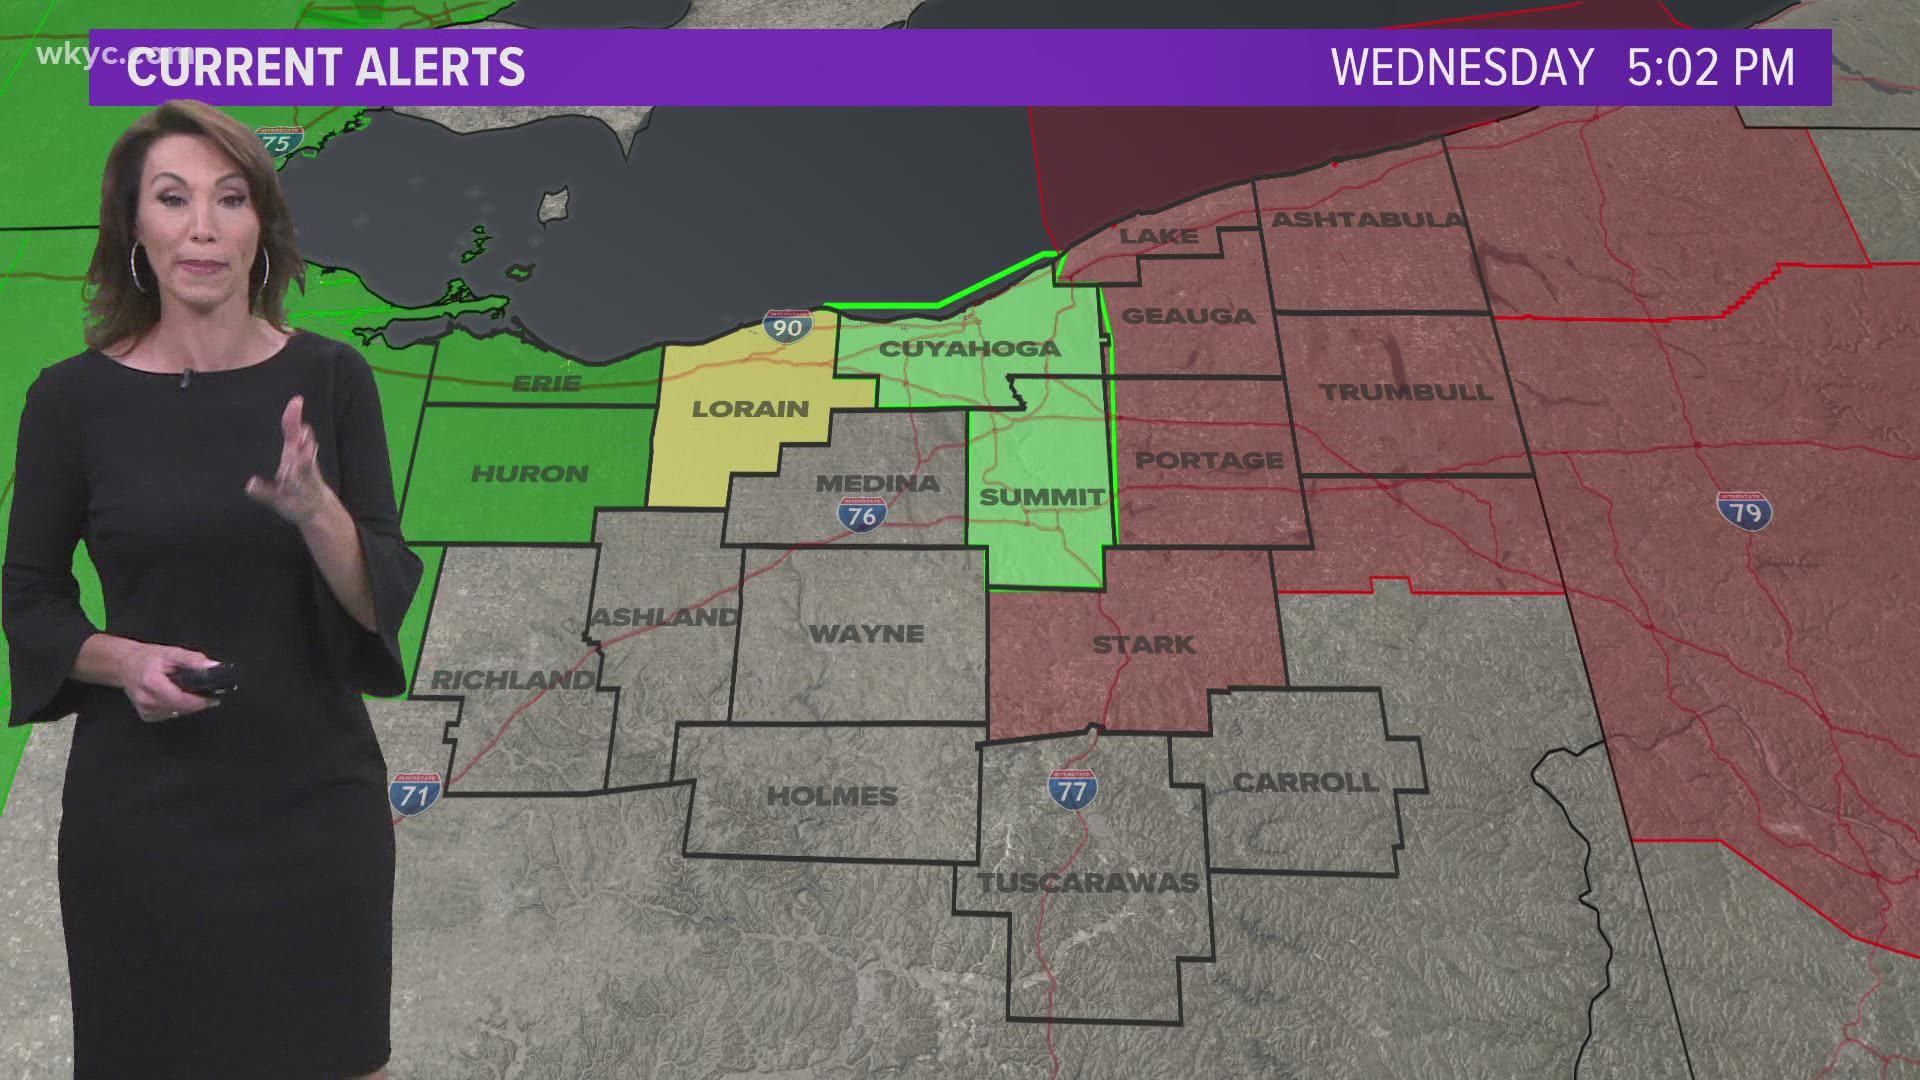 A tornado warning was also active for part of Ashtabula County, but has since expired.